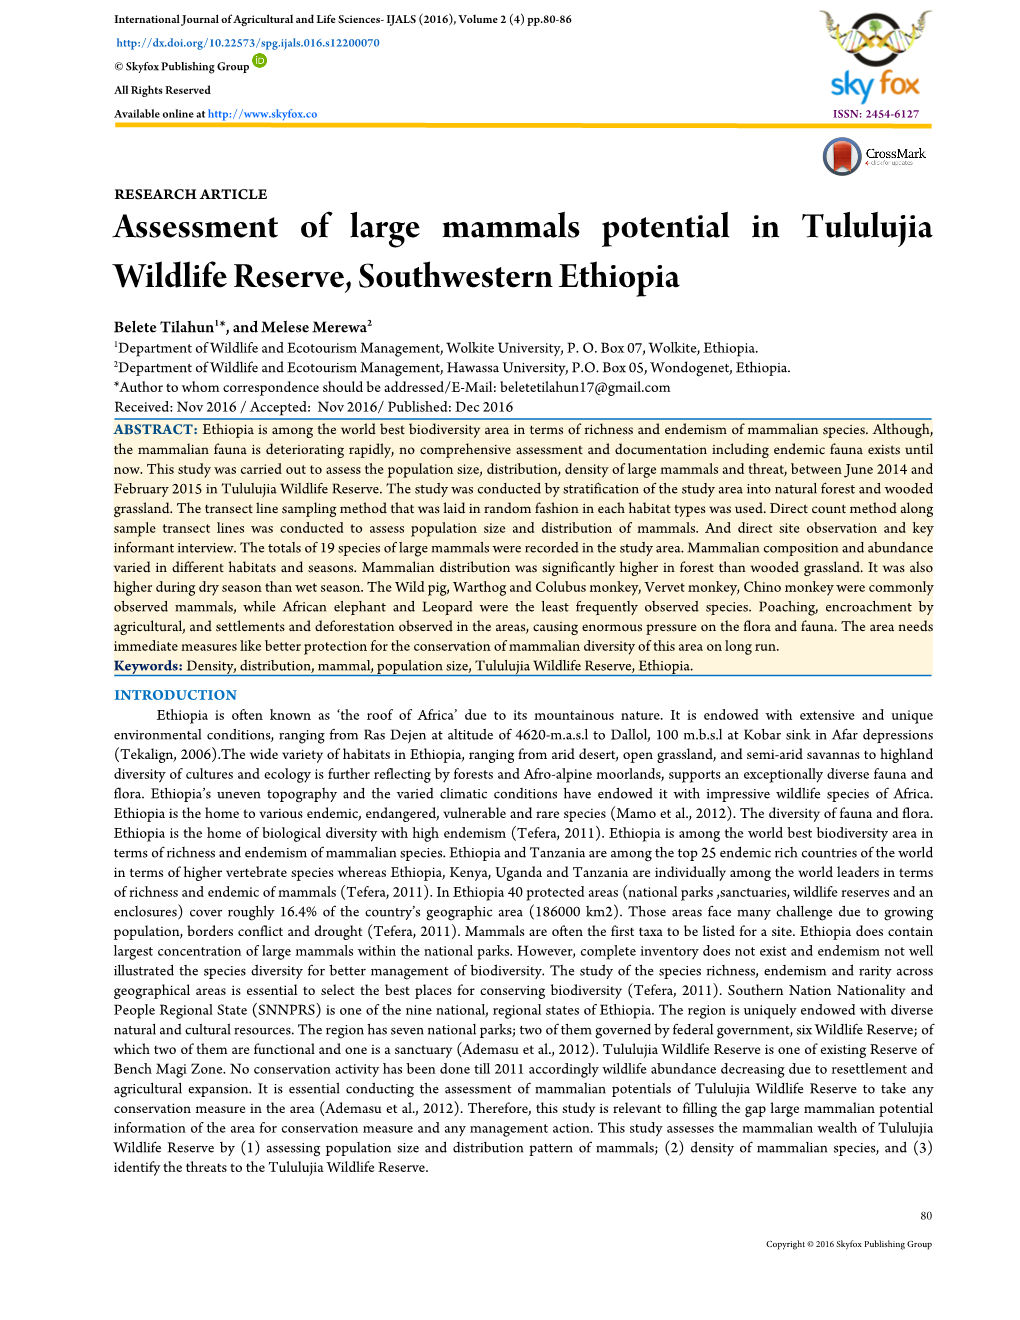 Assessment of Large Mammals Potential in Tululujia Wildlife Reserve, Southwestern Ethiopia